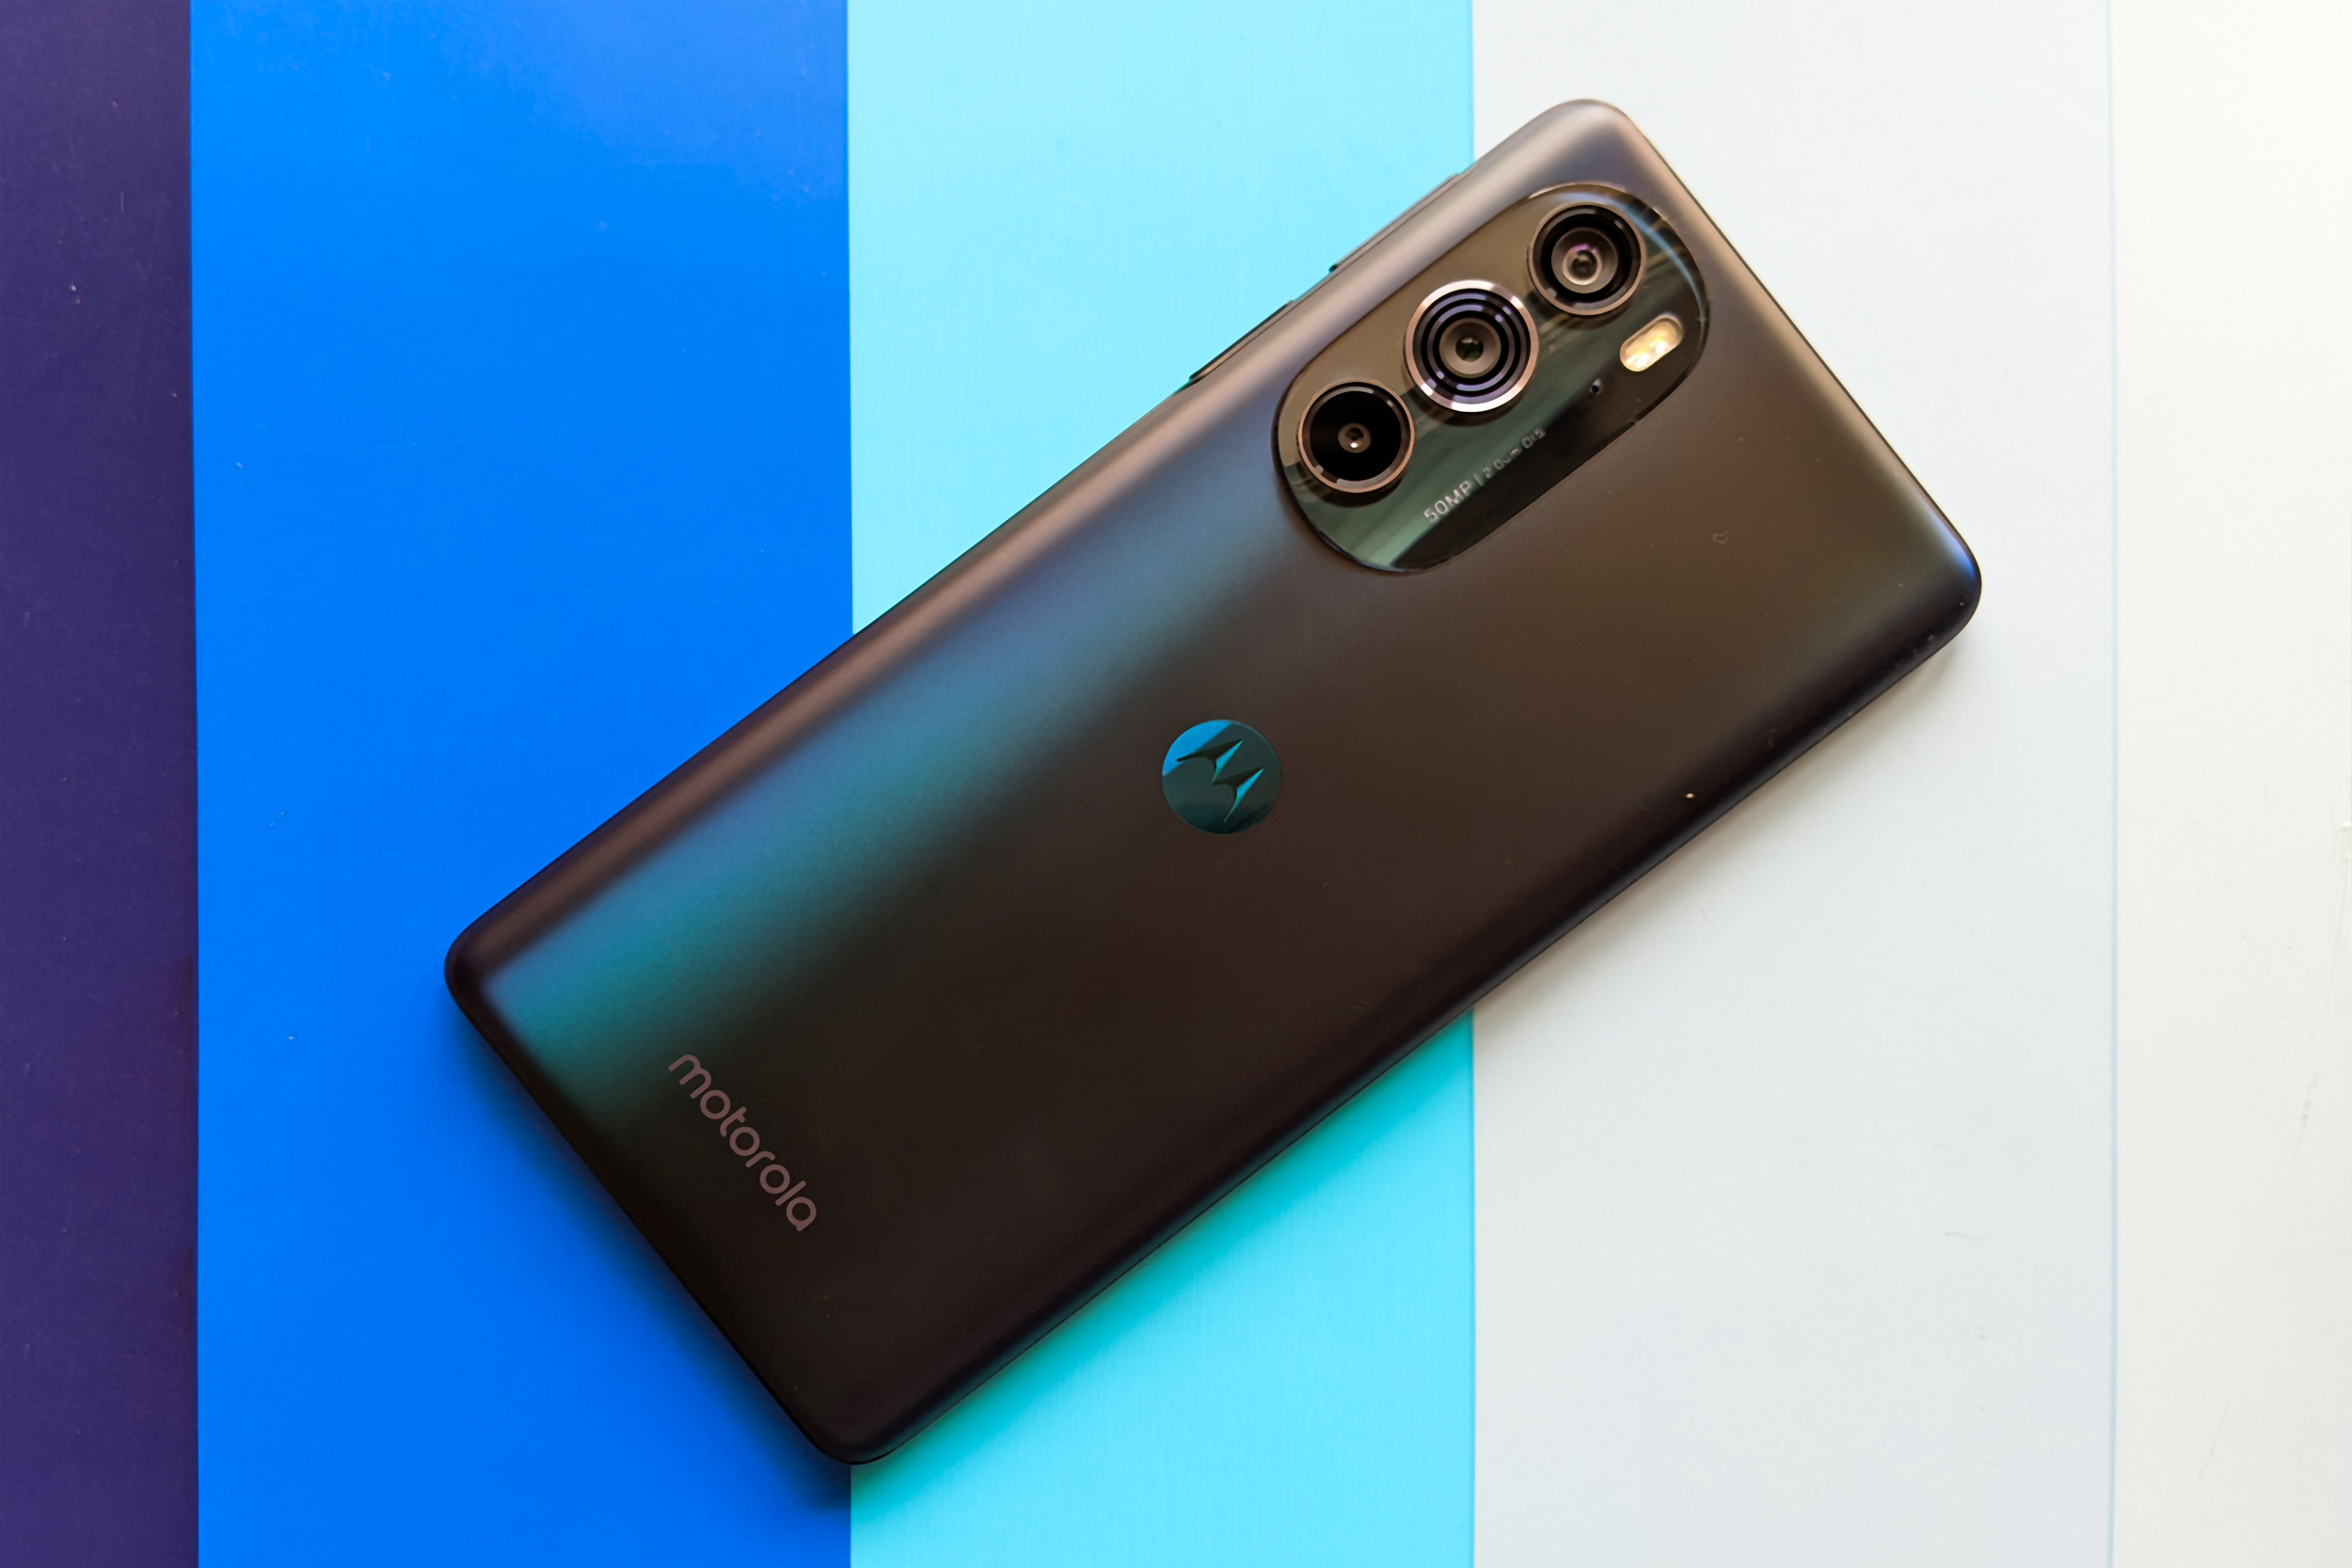 The new Edge 40 Pro proves Motorola is still serious about smartphones